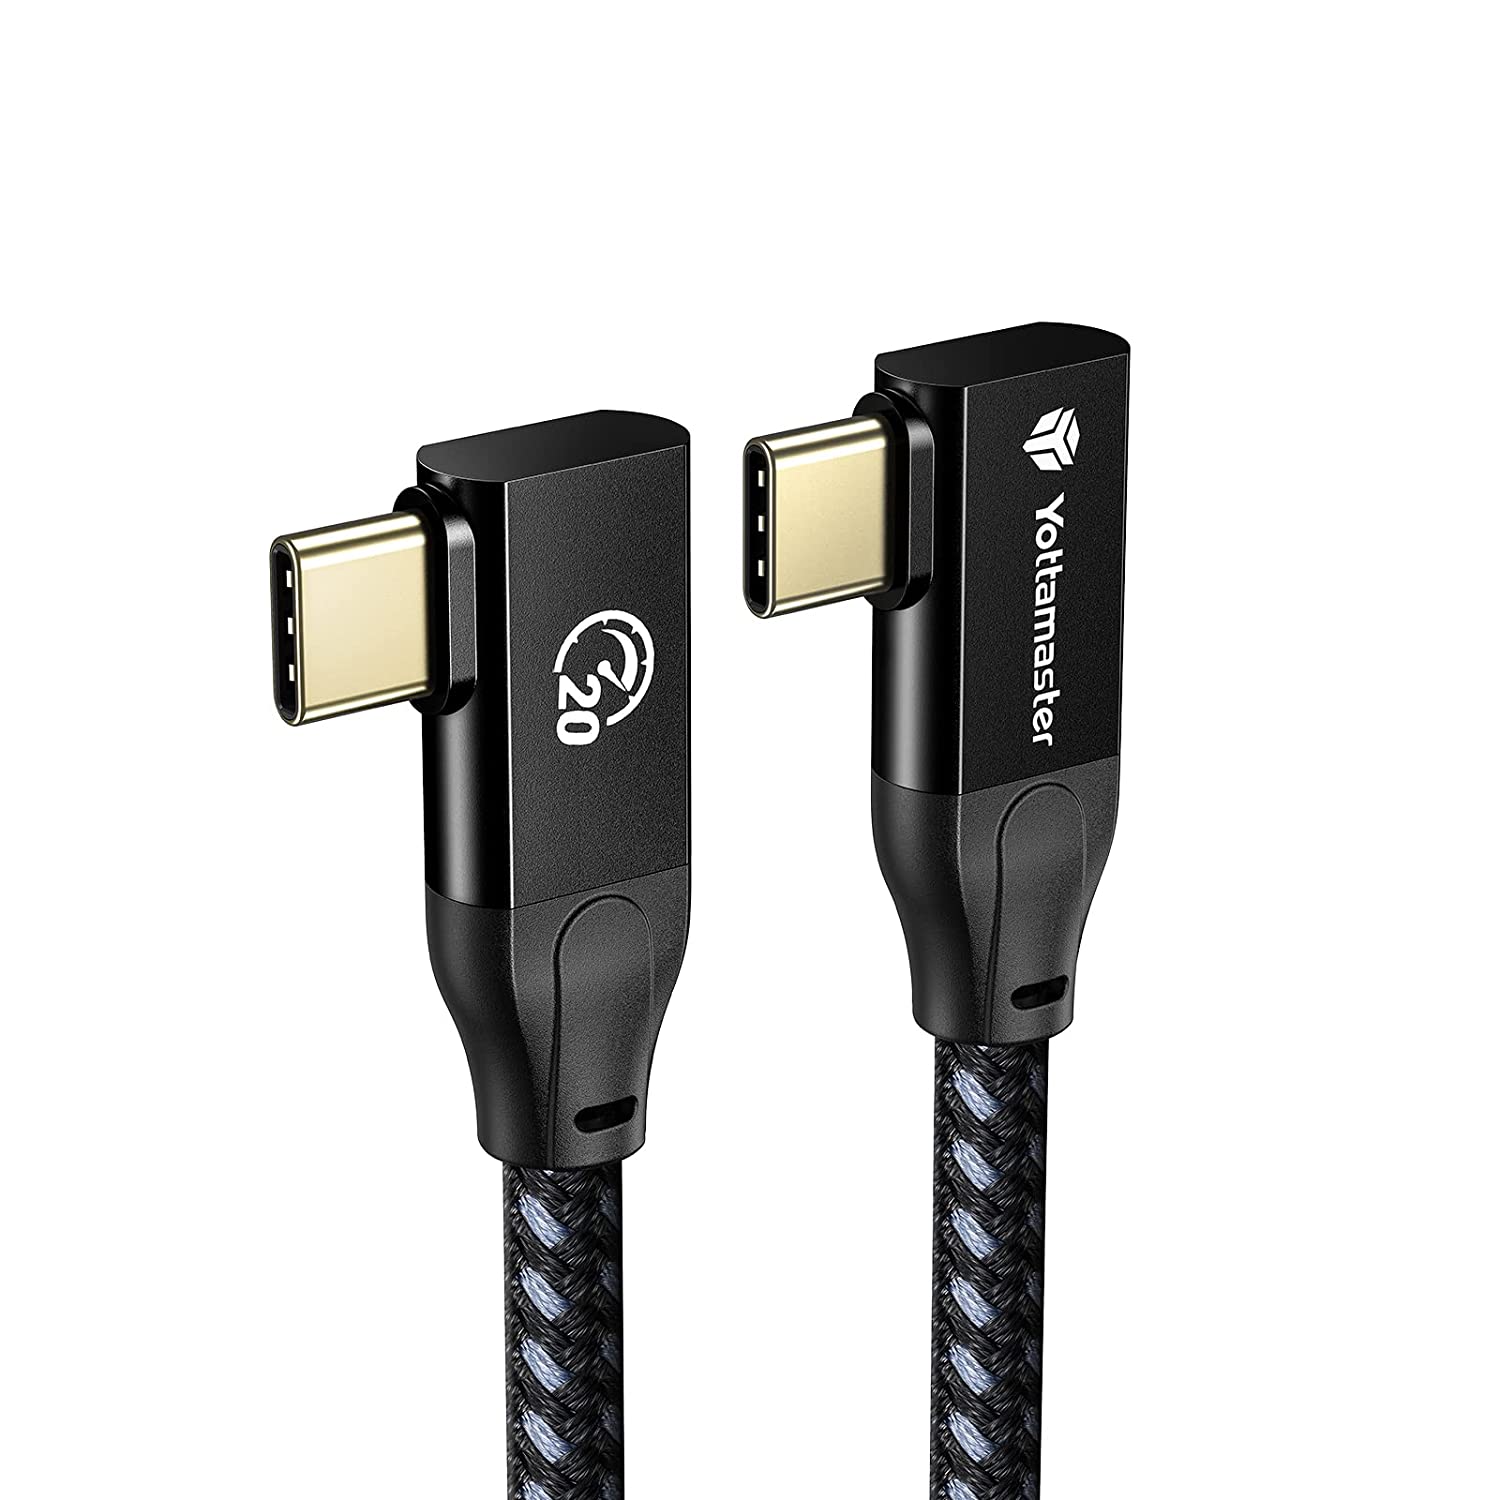 Yottamaster 20Gbps 100W USB C to USB C Cable